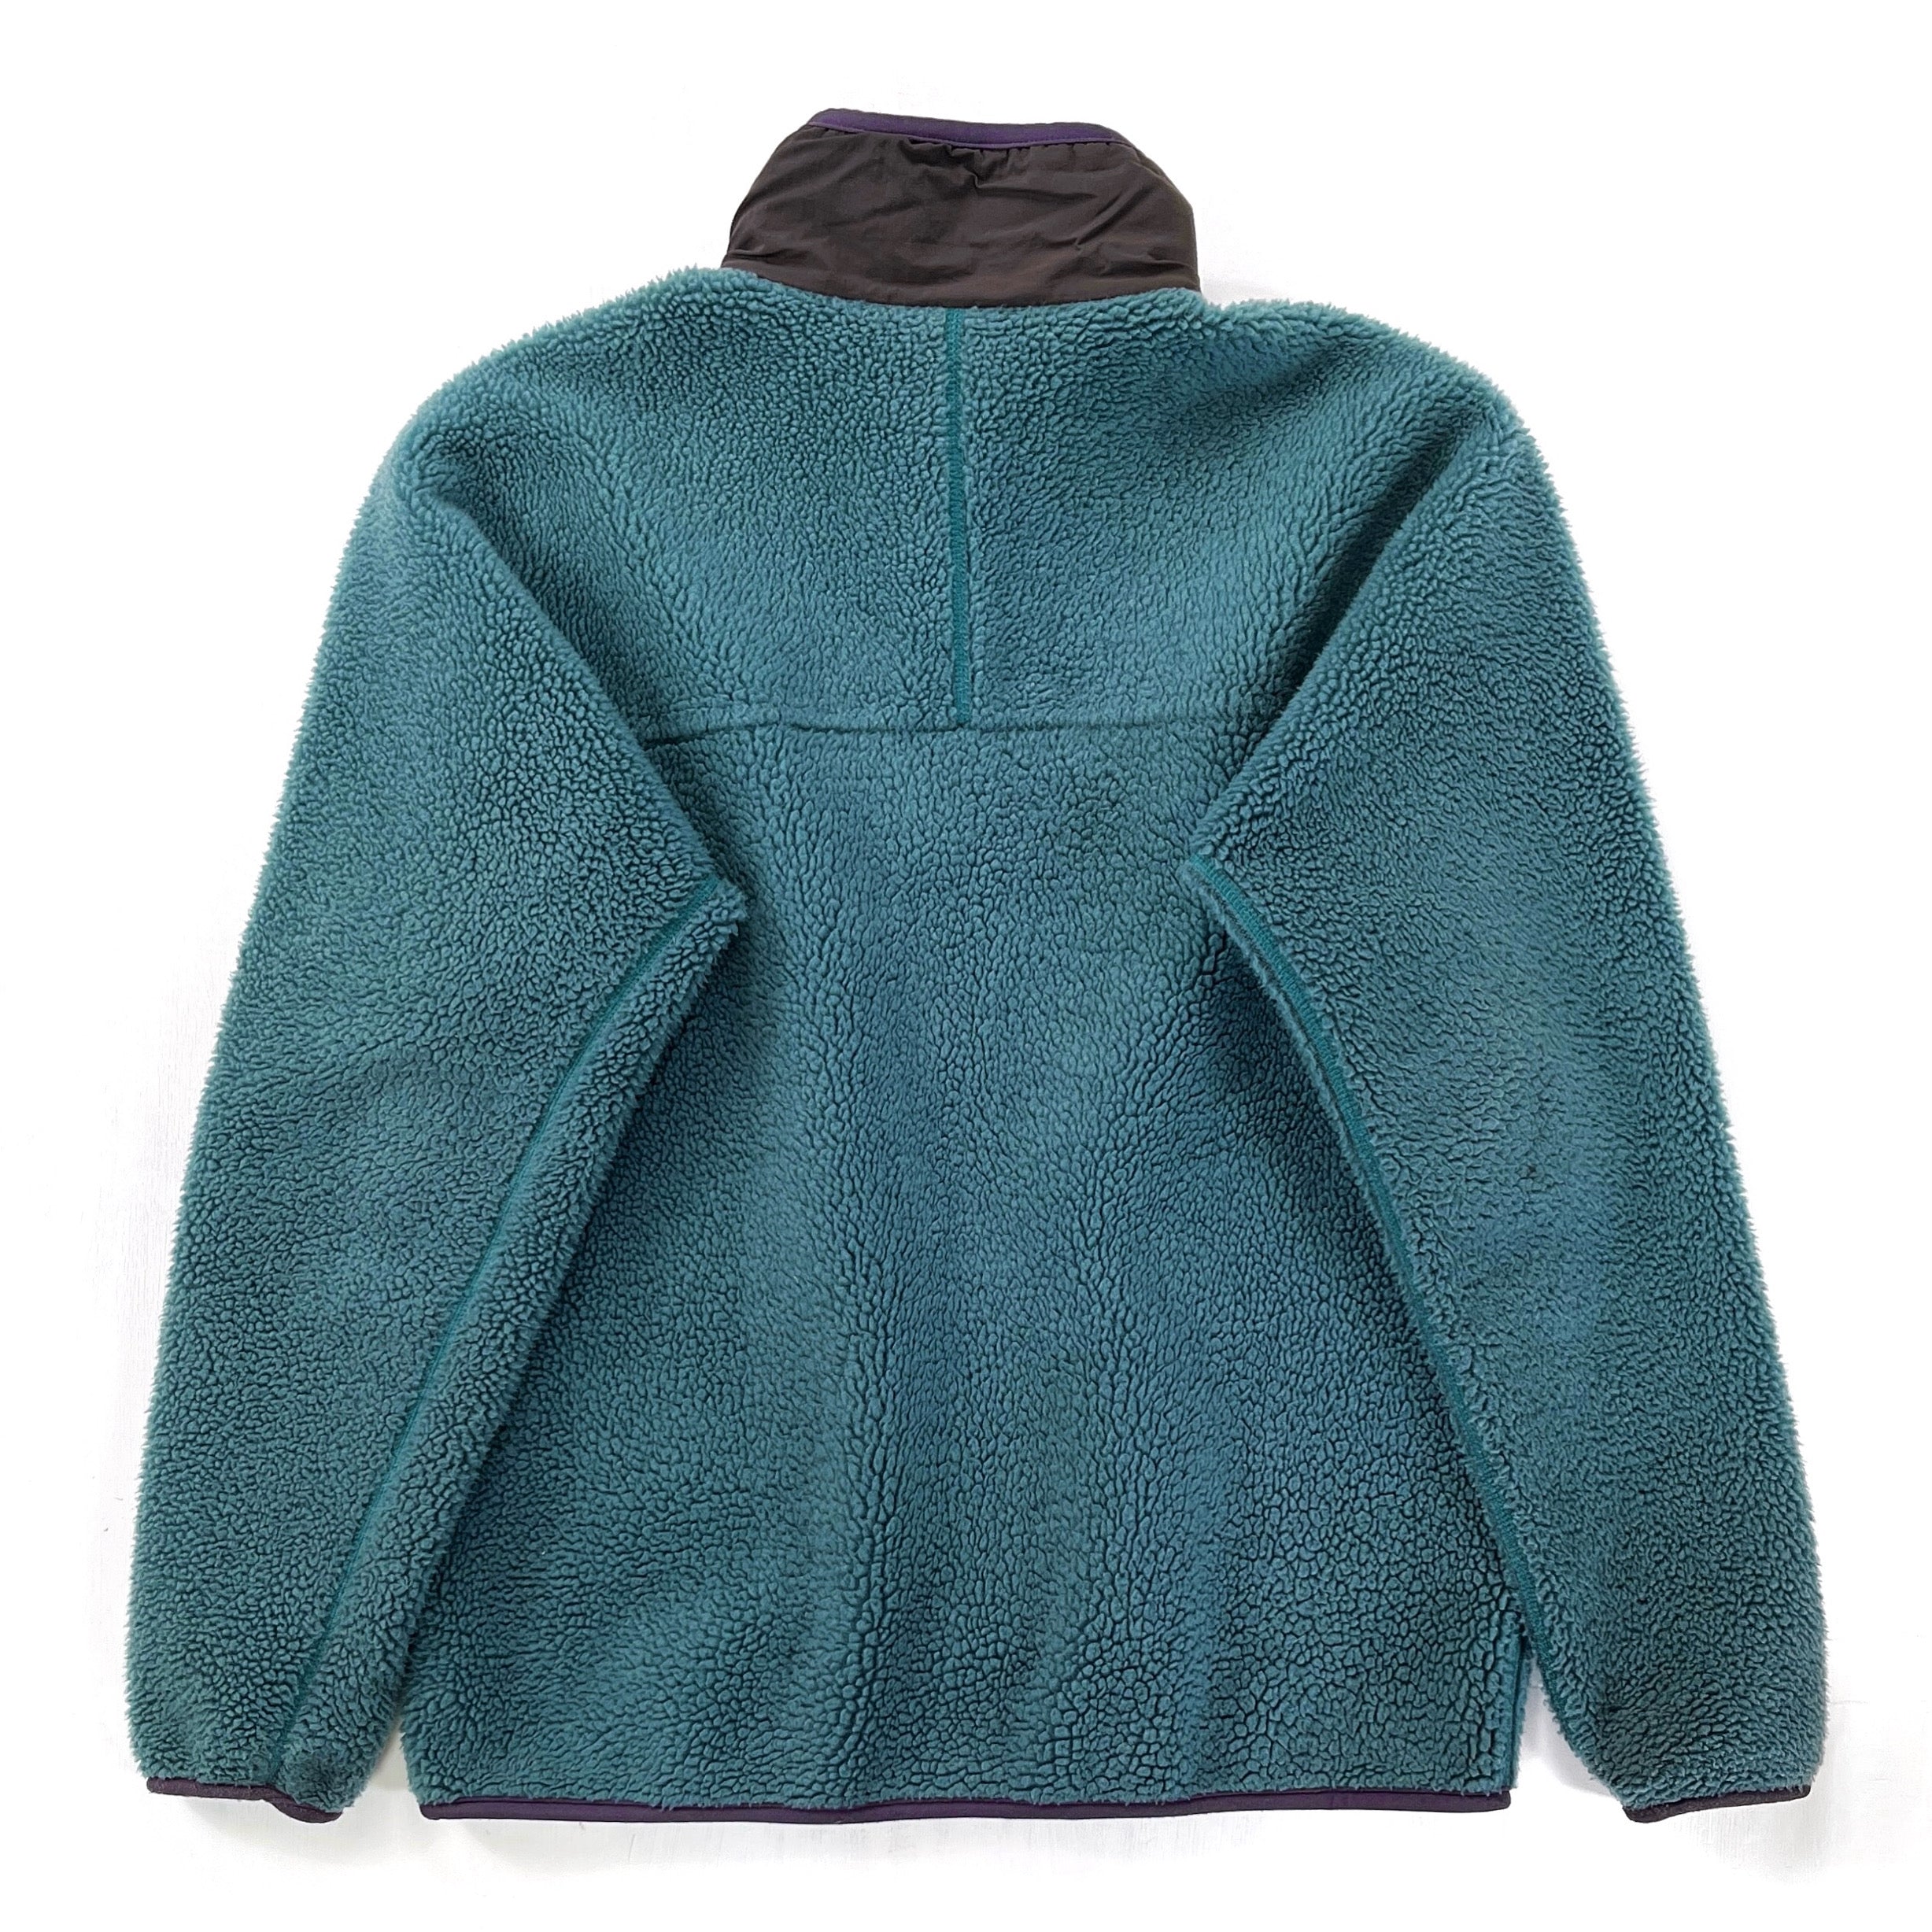 1994 Patagonia Made In The U.S.A. Retro-X Fleece Jacket, Spruce (L)